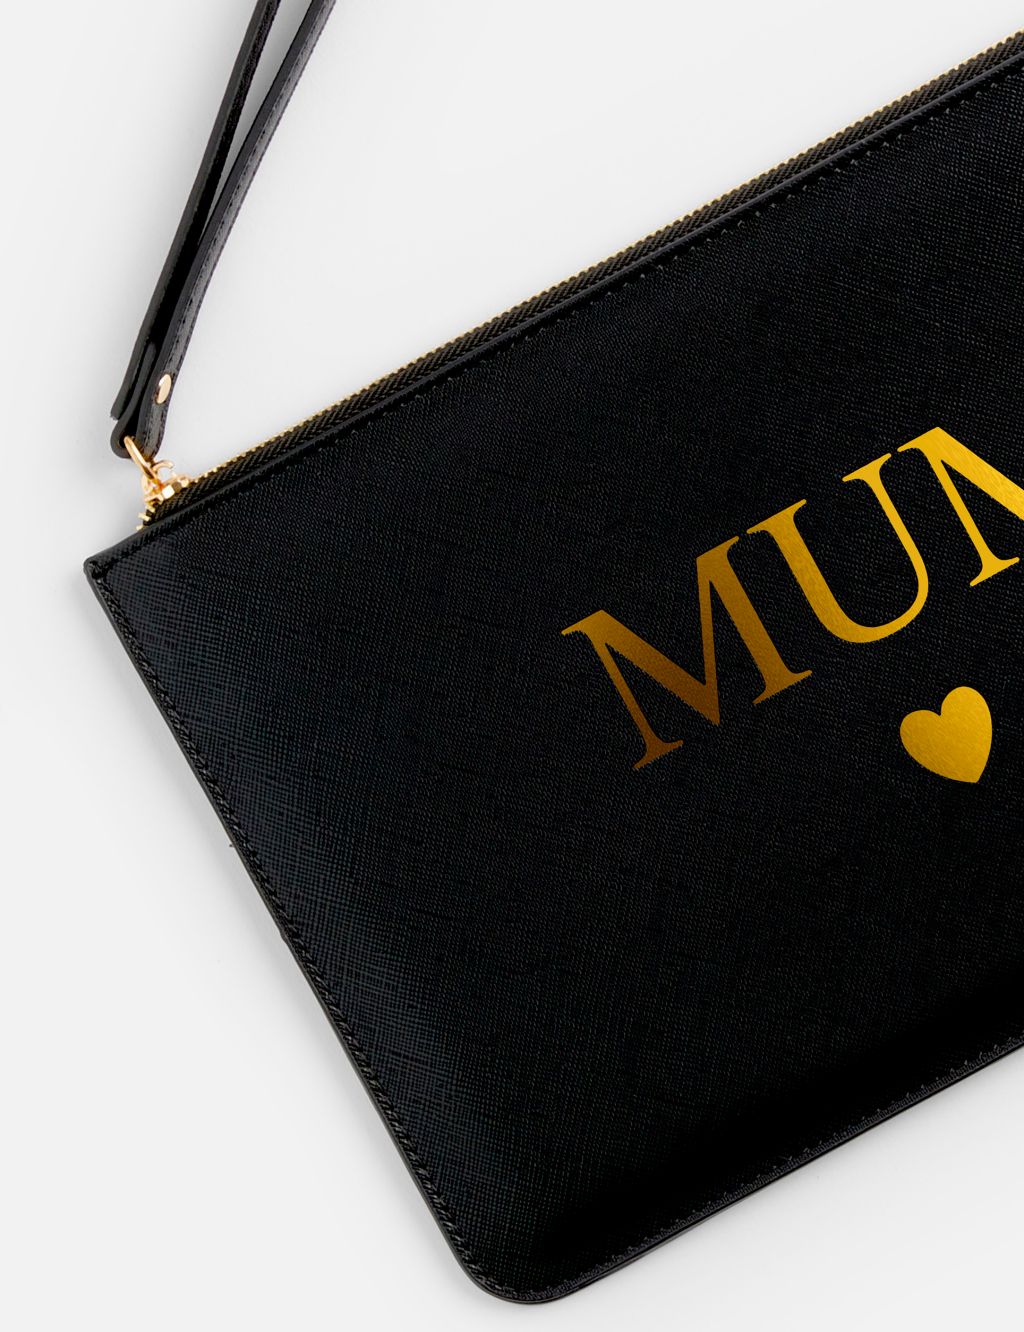 Personalised Accessory Pouch 1 of 3